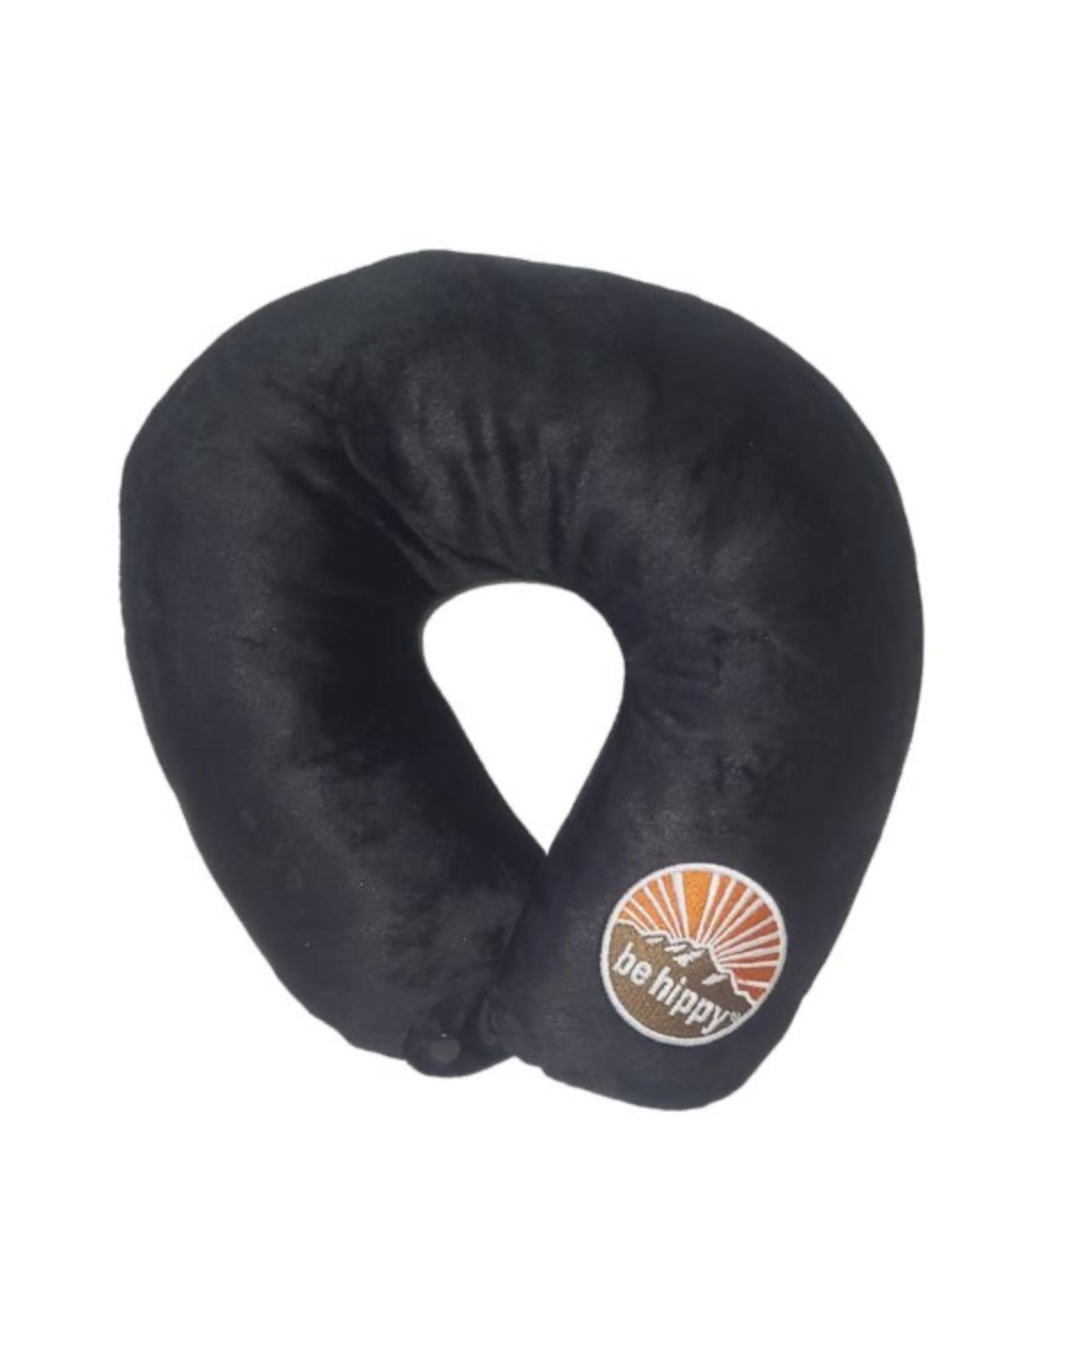 Be Hippy Travel Pillow